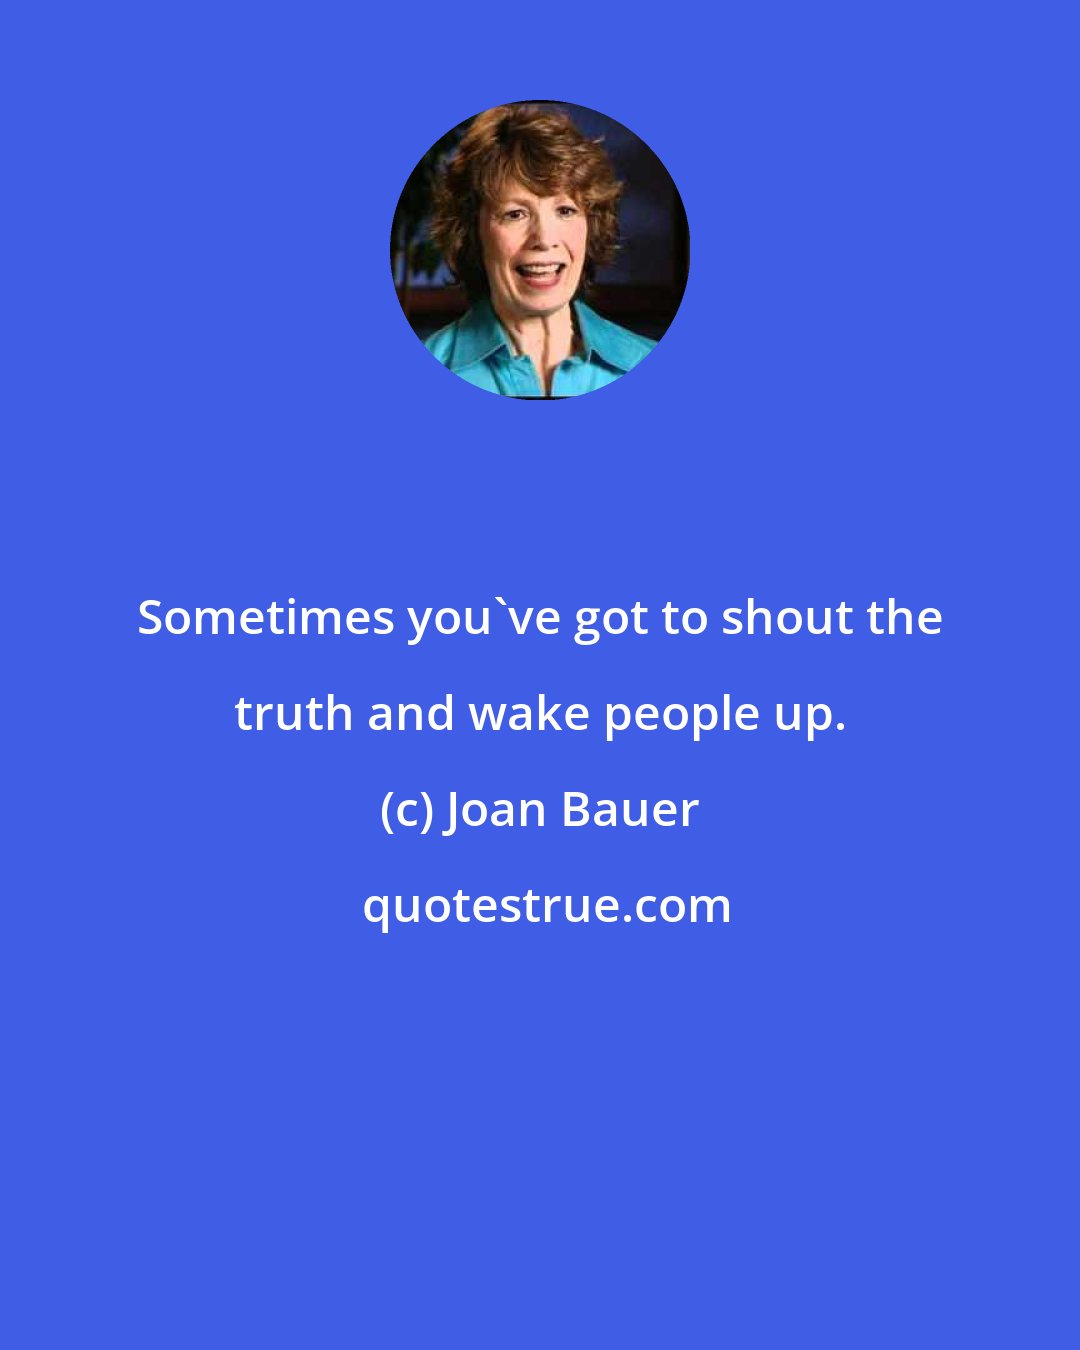 Joan Bauer: Sometimes you've got to shout the truth and wake people up.